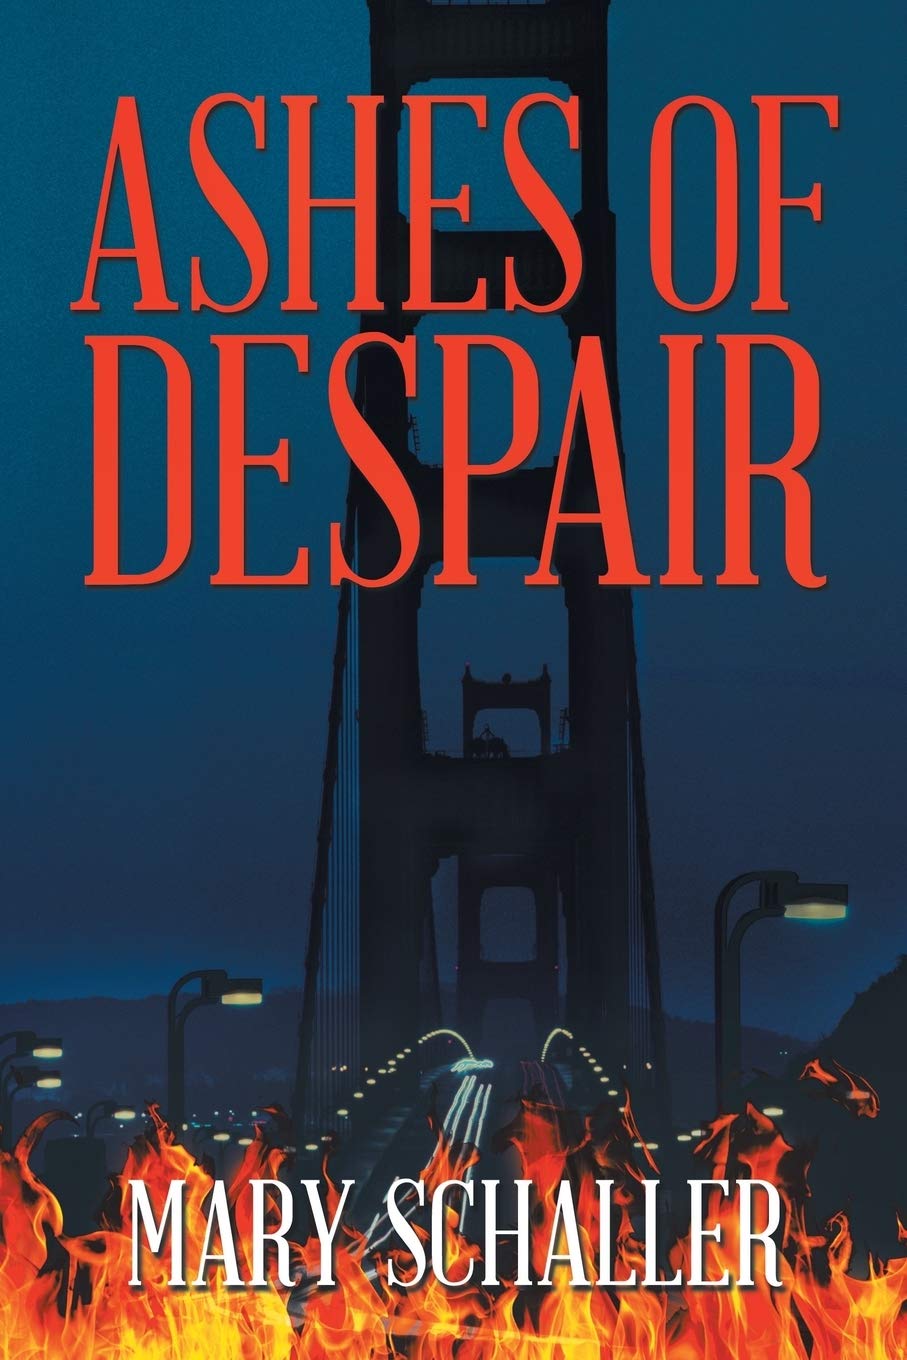 Mary Schaller launches book, Ashes of Despair; promoted by Author’s Tranquility Press